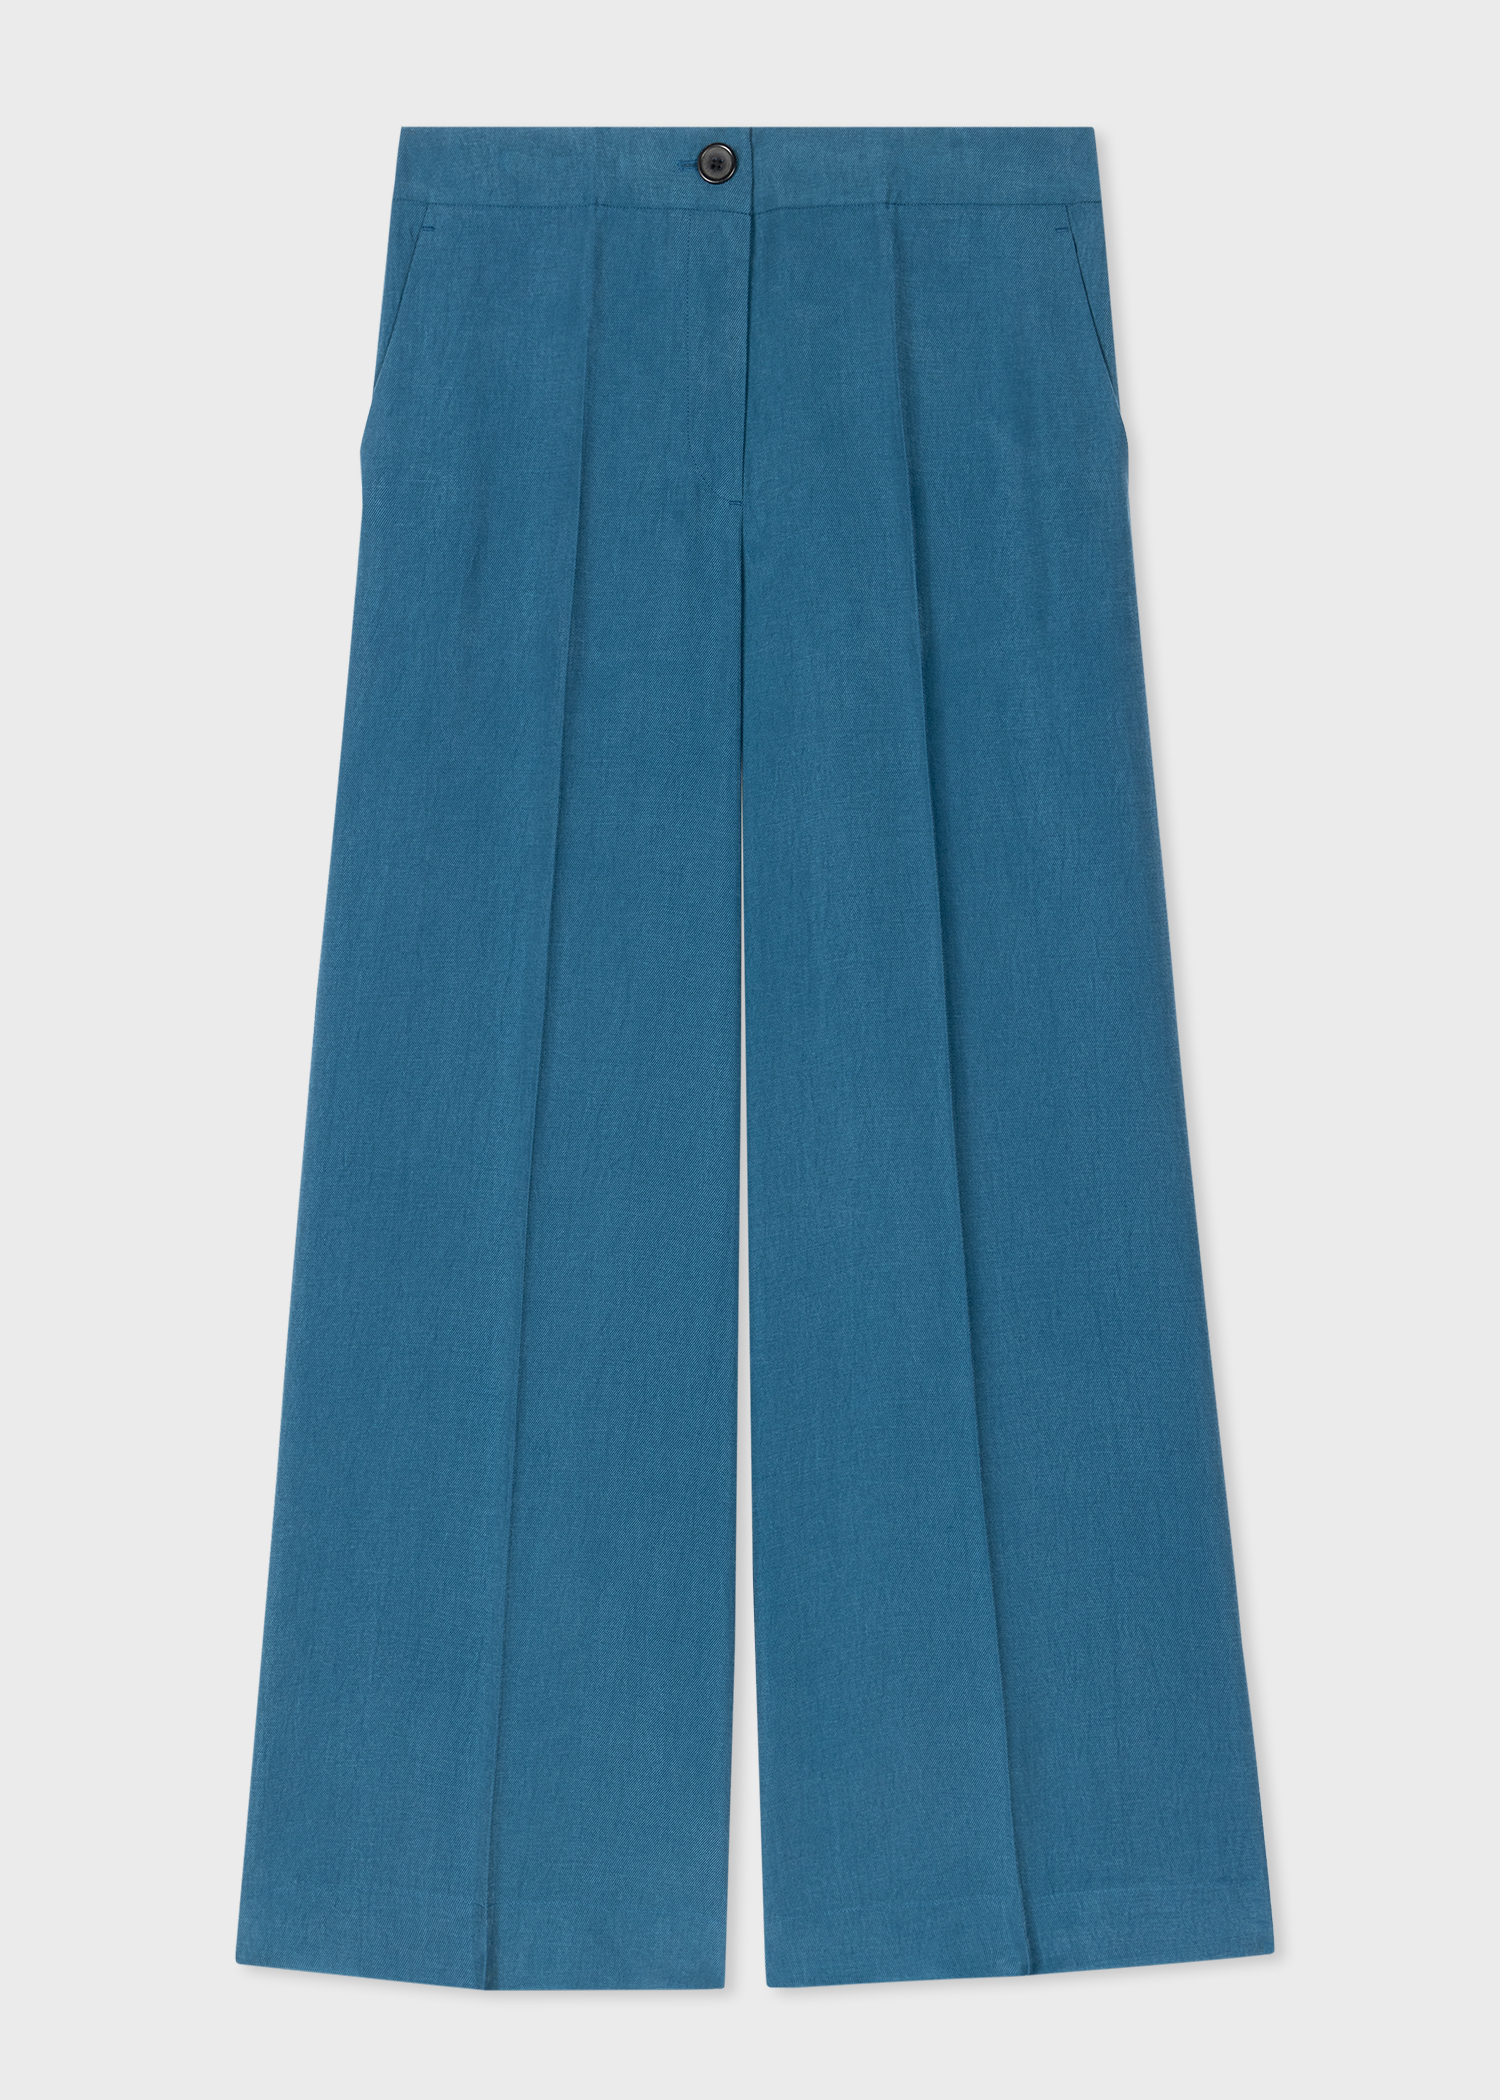 Women's Teal Wide Leg Cropped Trousers